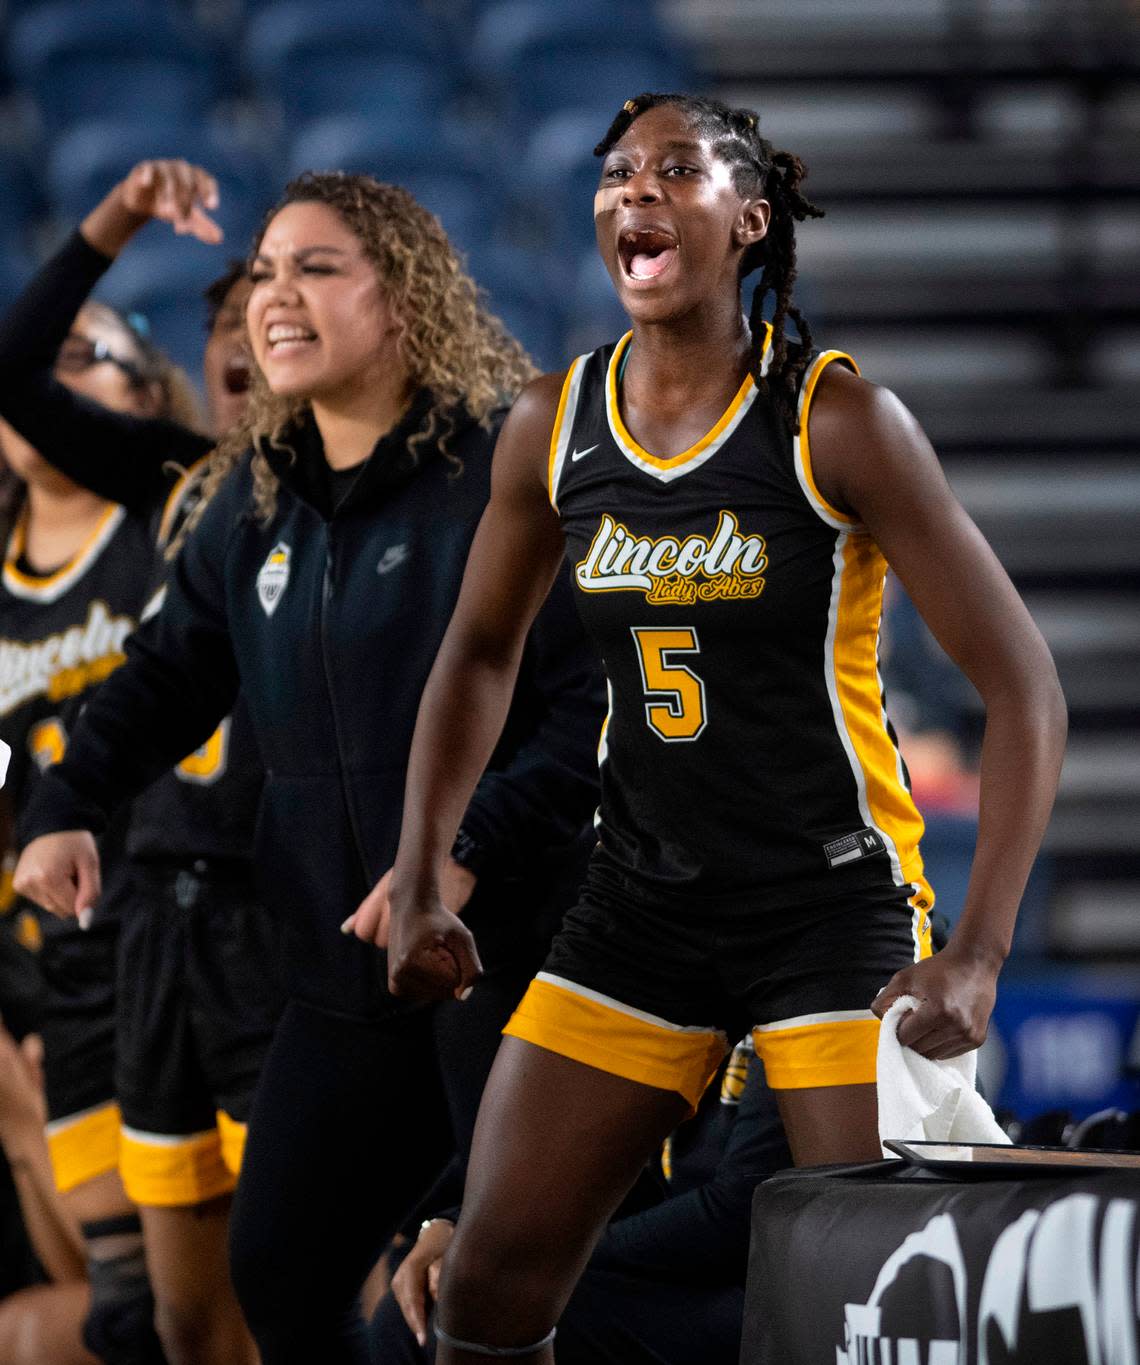 Lincoln’s Oliviyah Edwards celebrates an Abes rally during their state quarterfinal game against the Lake Washington Kangaroos at the WIAA state basketball tournament in the Tacoma Dome in Tacoma, Washington, on Wednesday, March 1, 2023. Lake Washington won the game, 57-52.